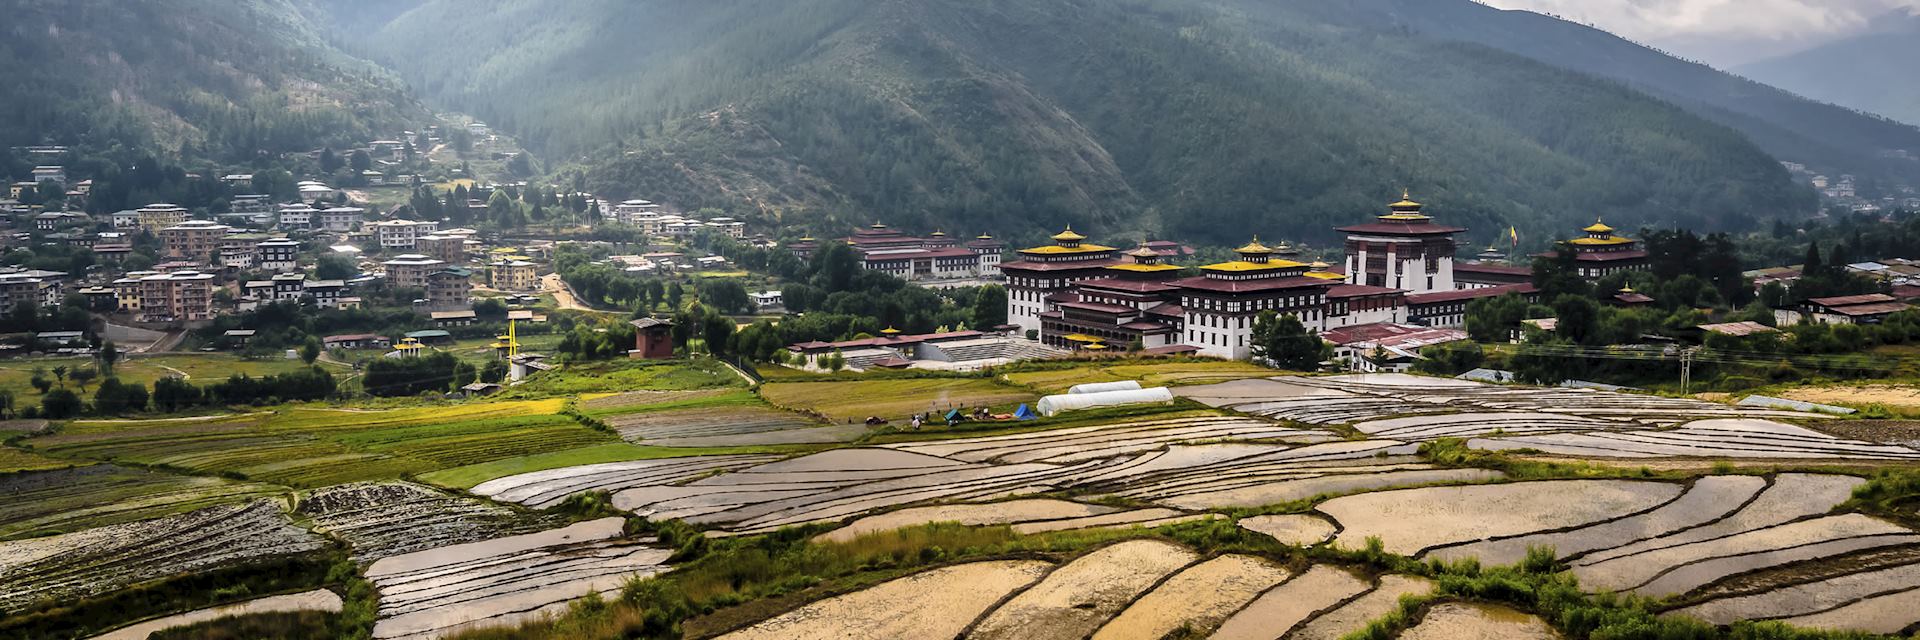 bhutan best time to visit from india